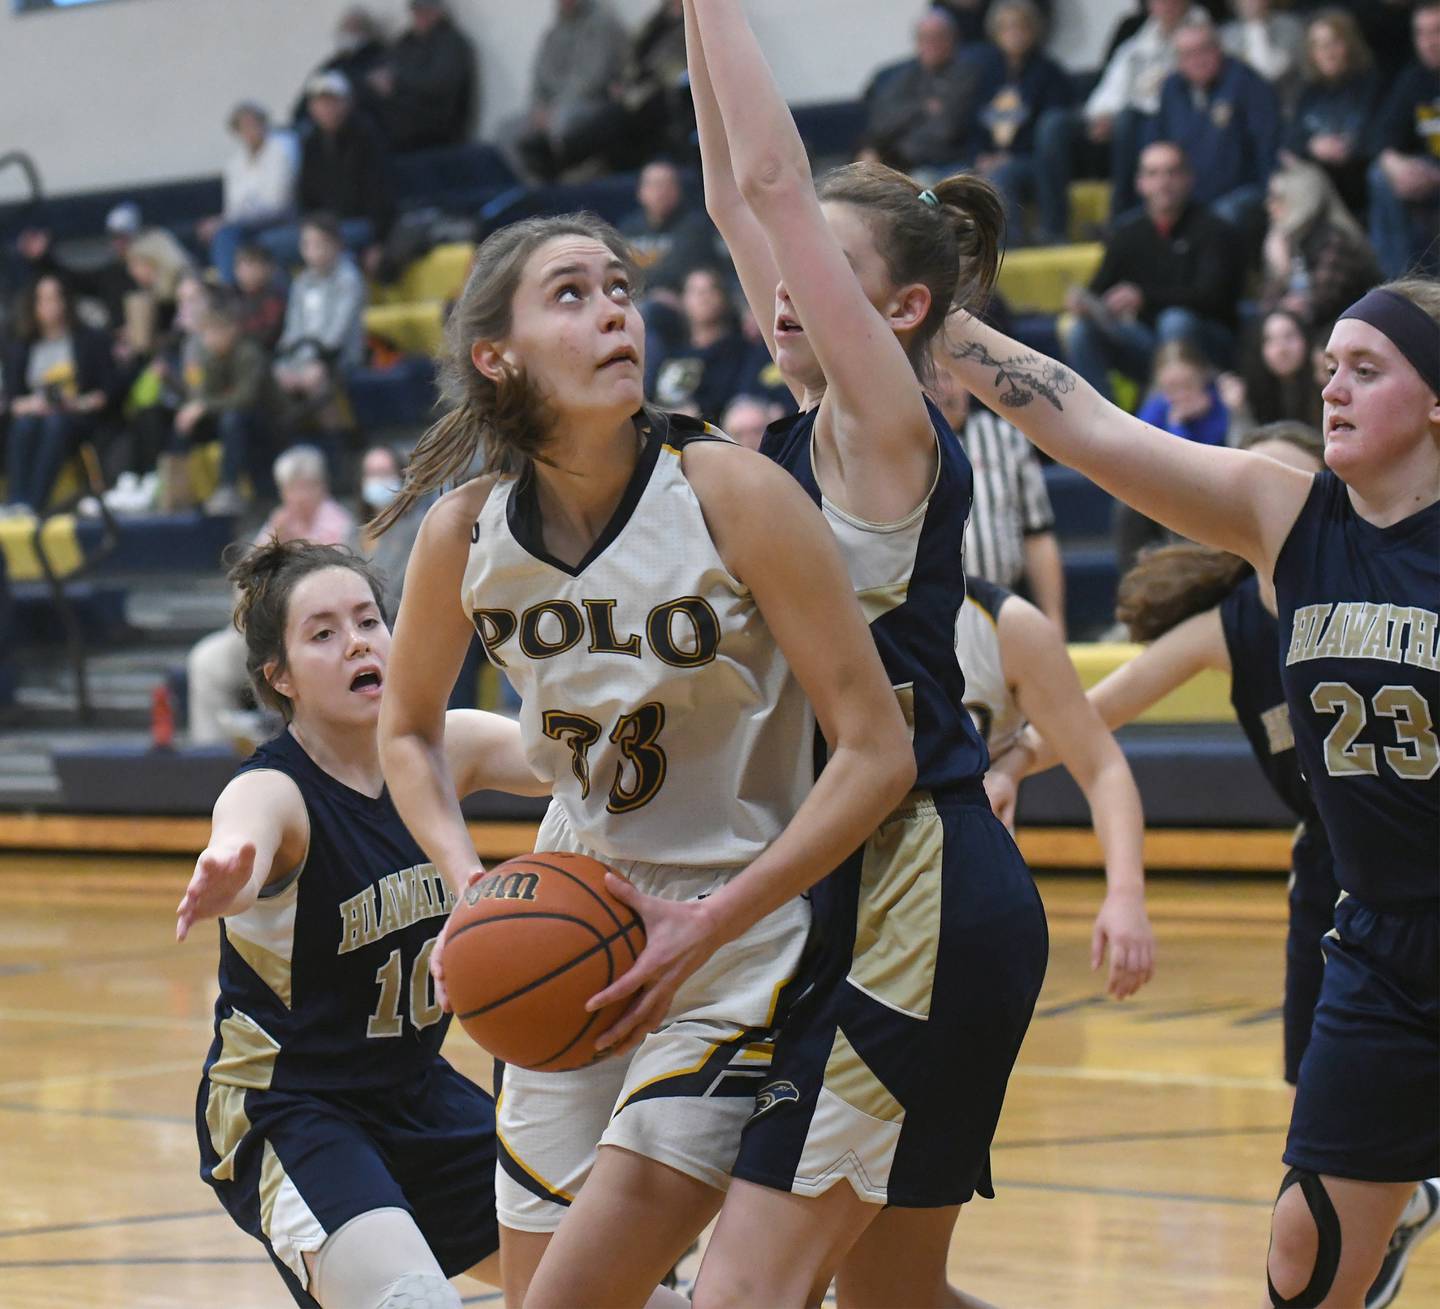 Polo's Lindee Poper looks at the basket as she gets ready to put up a shot during 1A regional action against Hiawatha in Polo.